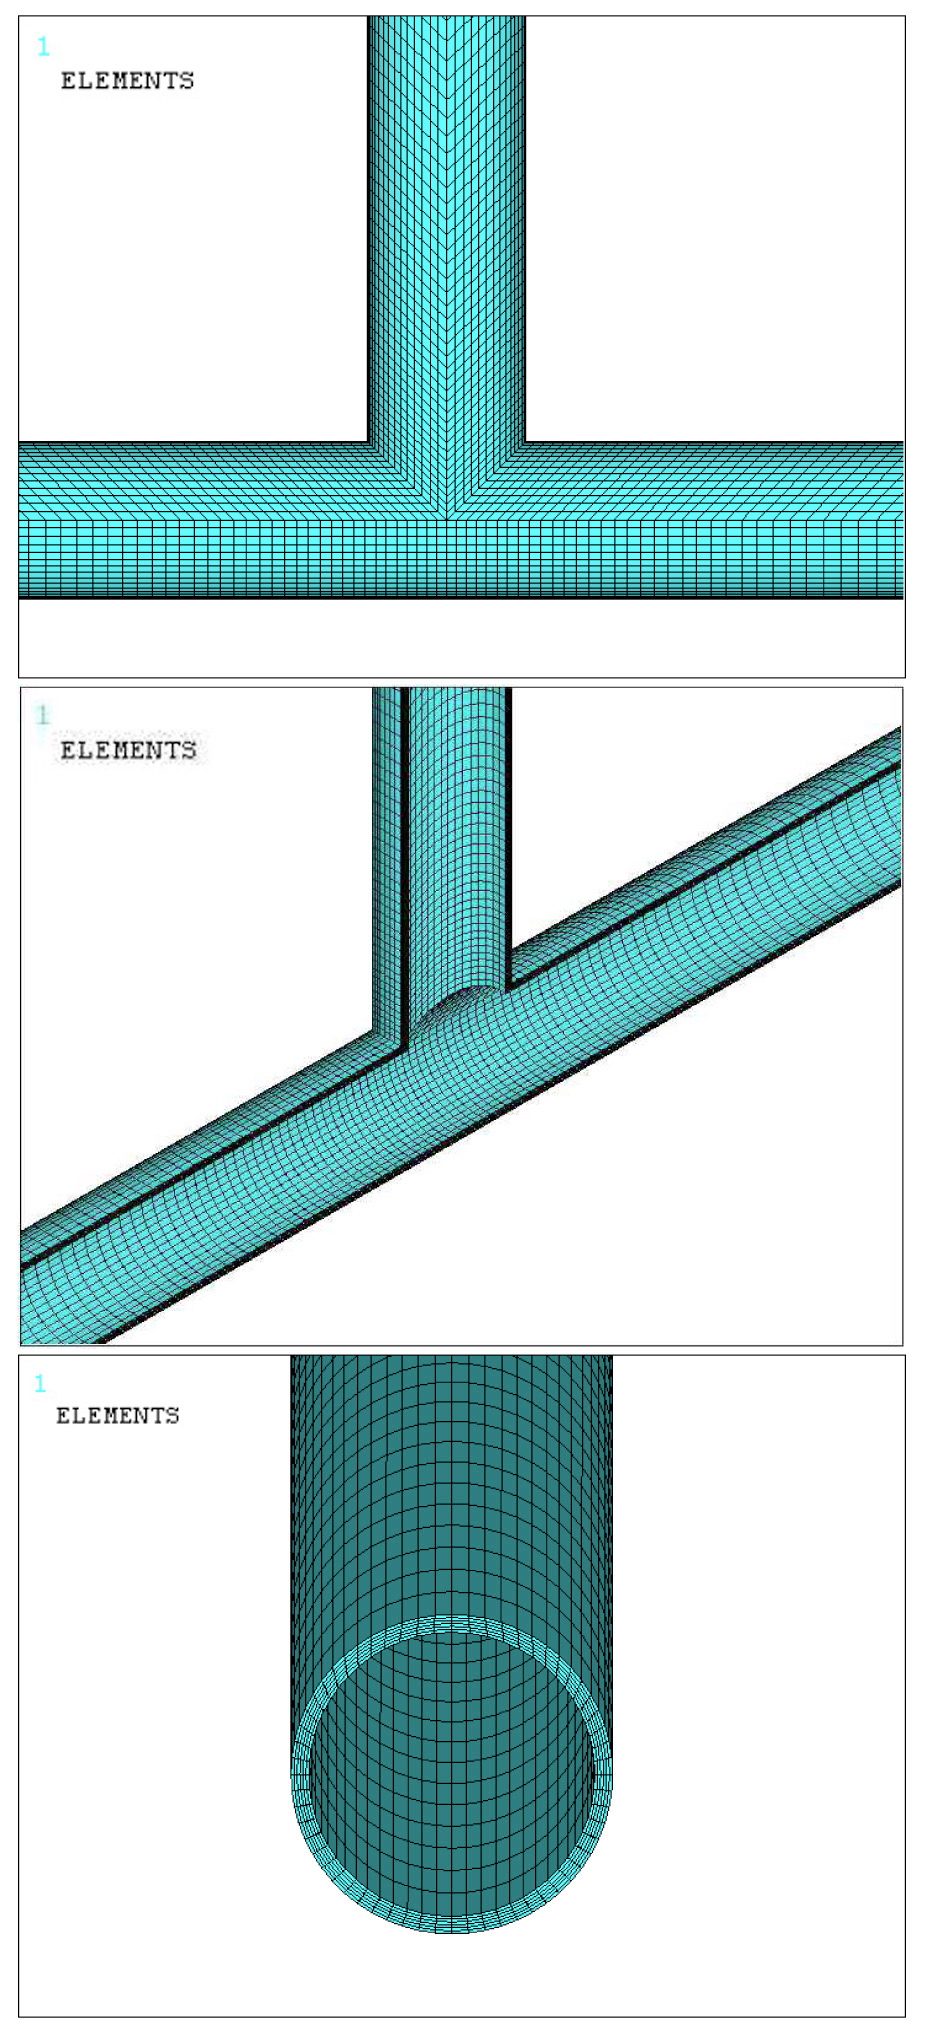 Finite Element Model for Structural Analysis